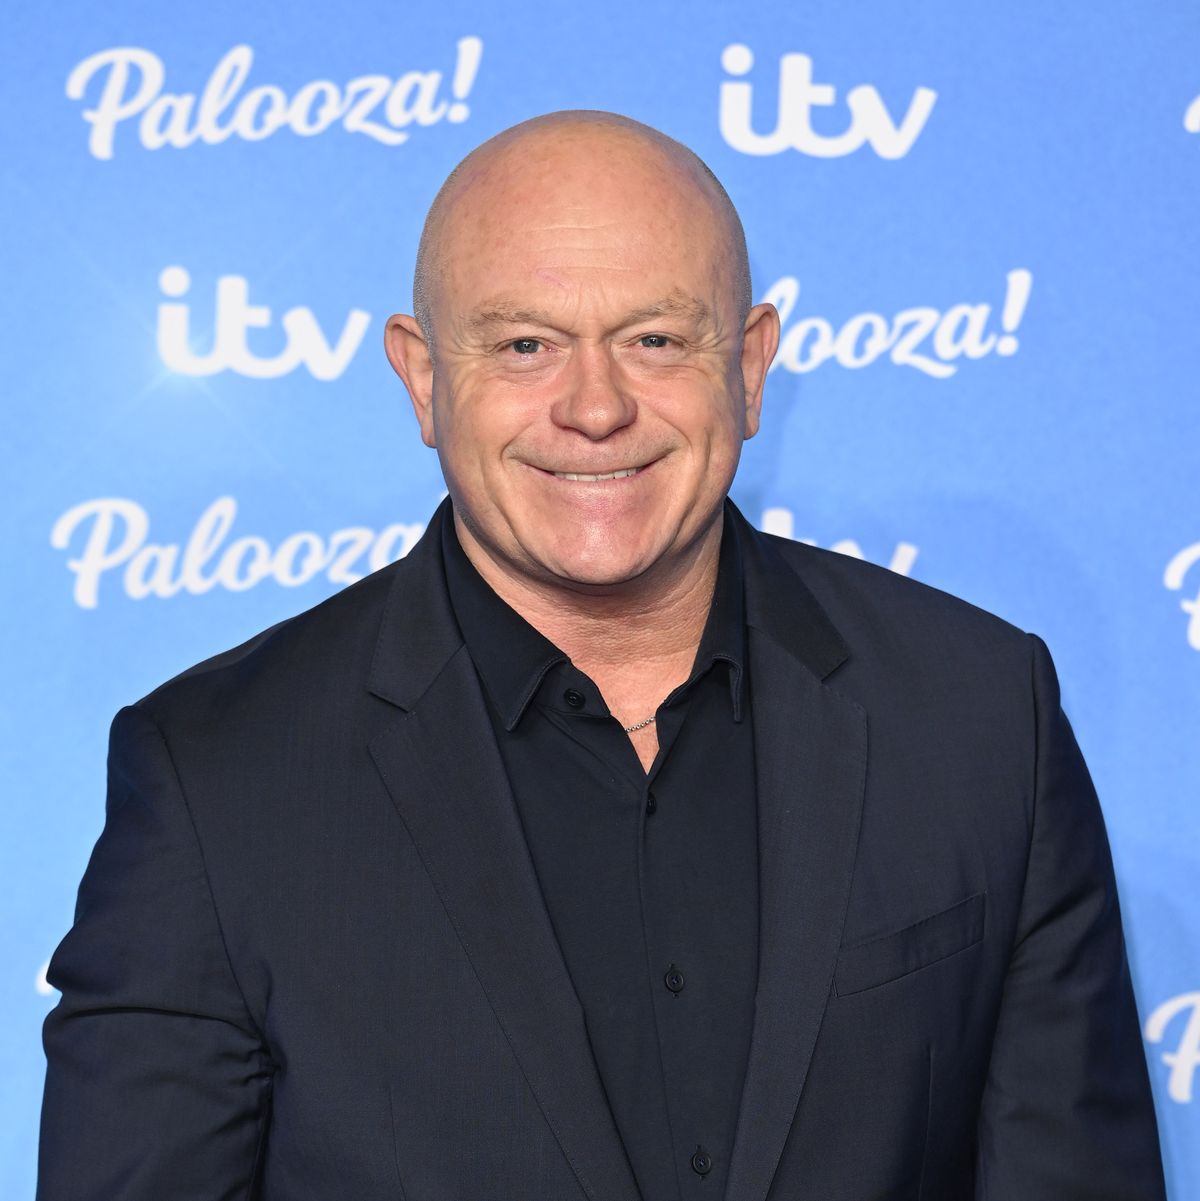 Ex EastEnders star Ross Kemp's show cancelled amid “massive” filming issues